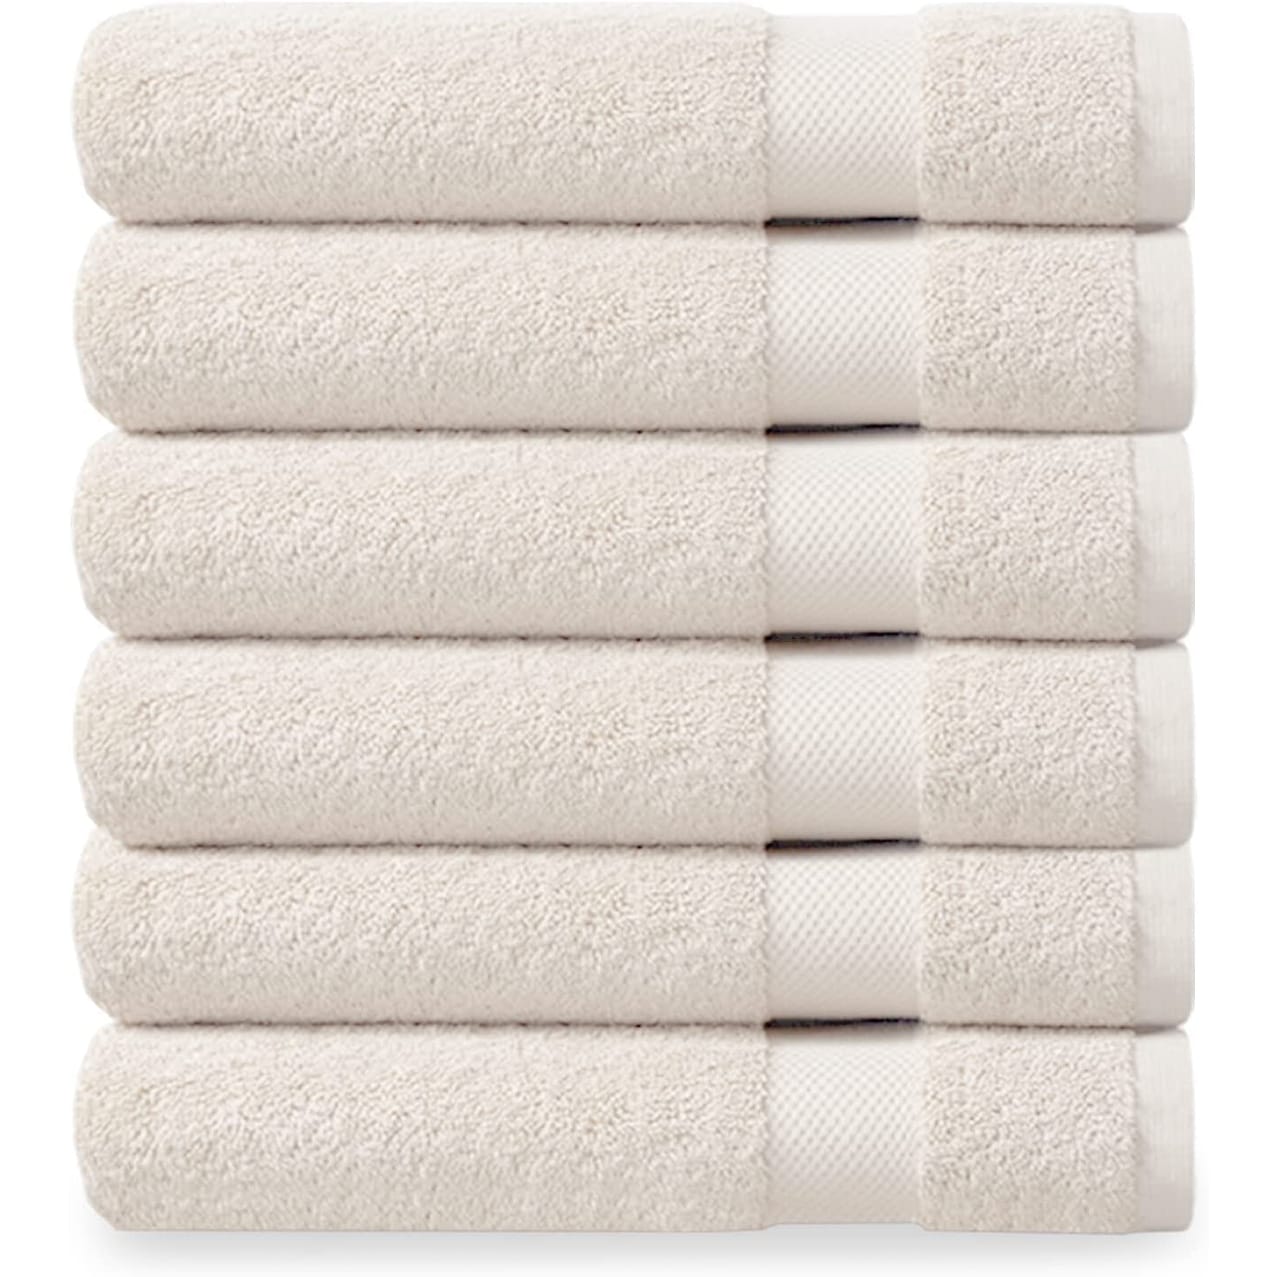 https://ak1.ostkcdn.com/images/products/is/images/direct/0f7c8b6f2029121734de498e6aebafce2aeb54c5/Delara-Organic-Cotton-Luxuriously-Plush-Washcloths-Pack-of-6-%7CGOTS-%26-OEKO-TEX-Certified-%7C650-GSM-Long-Staple-%7C-Quick-Dry-%26-Soft.jpg